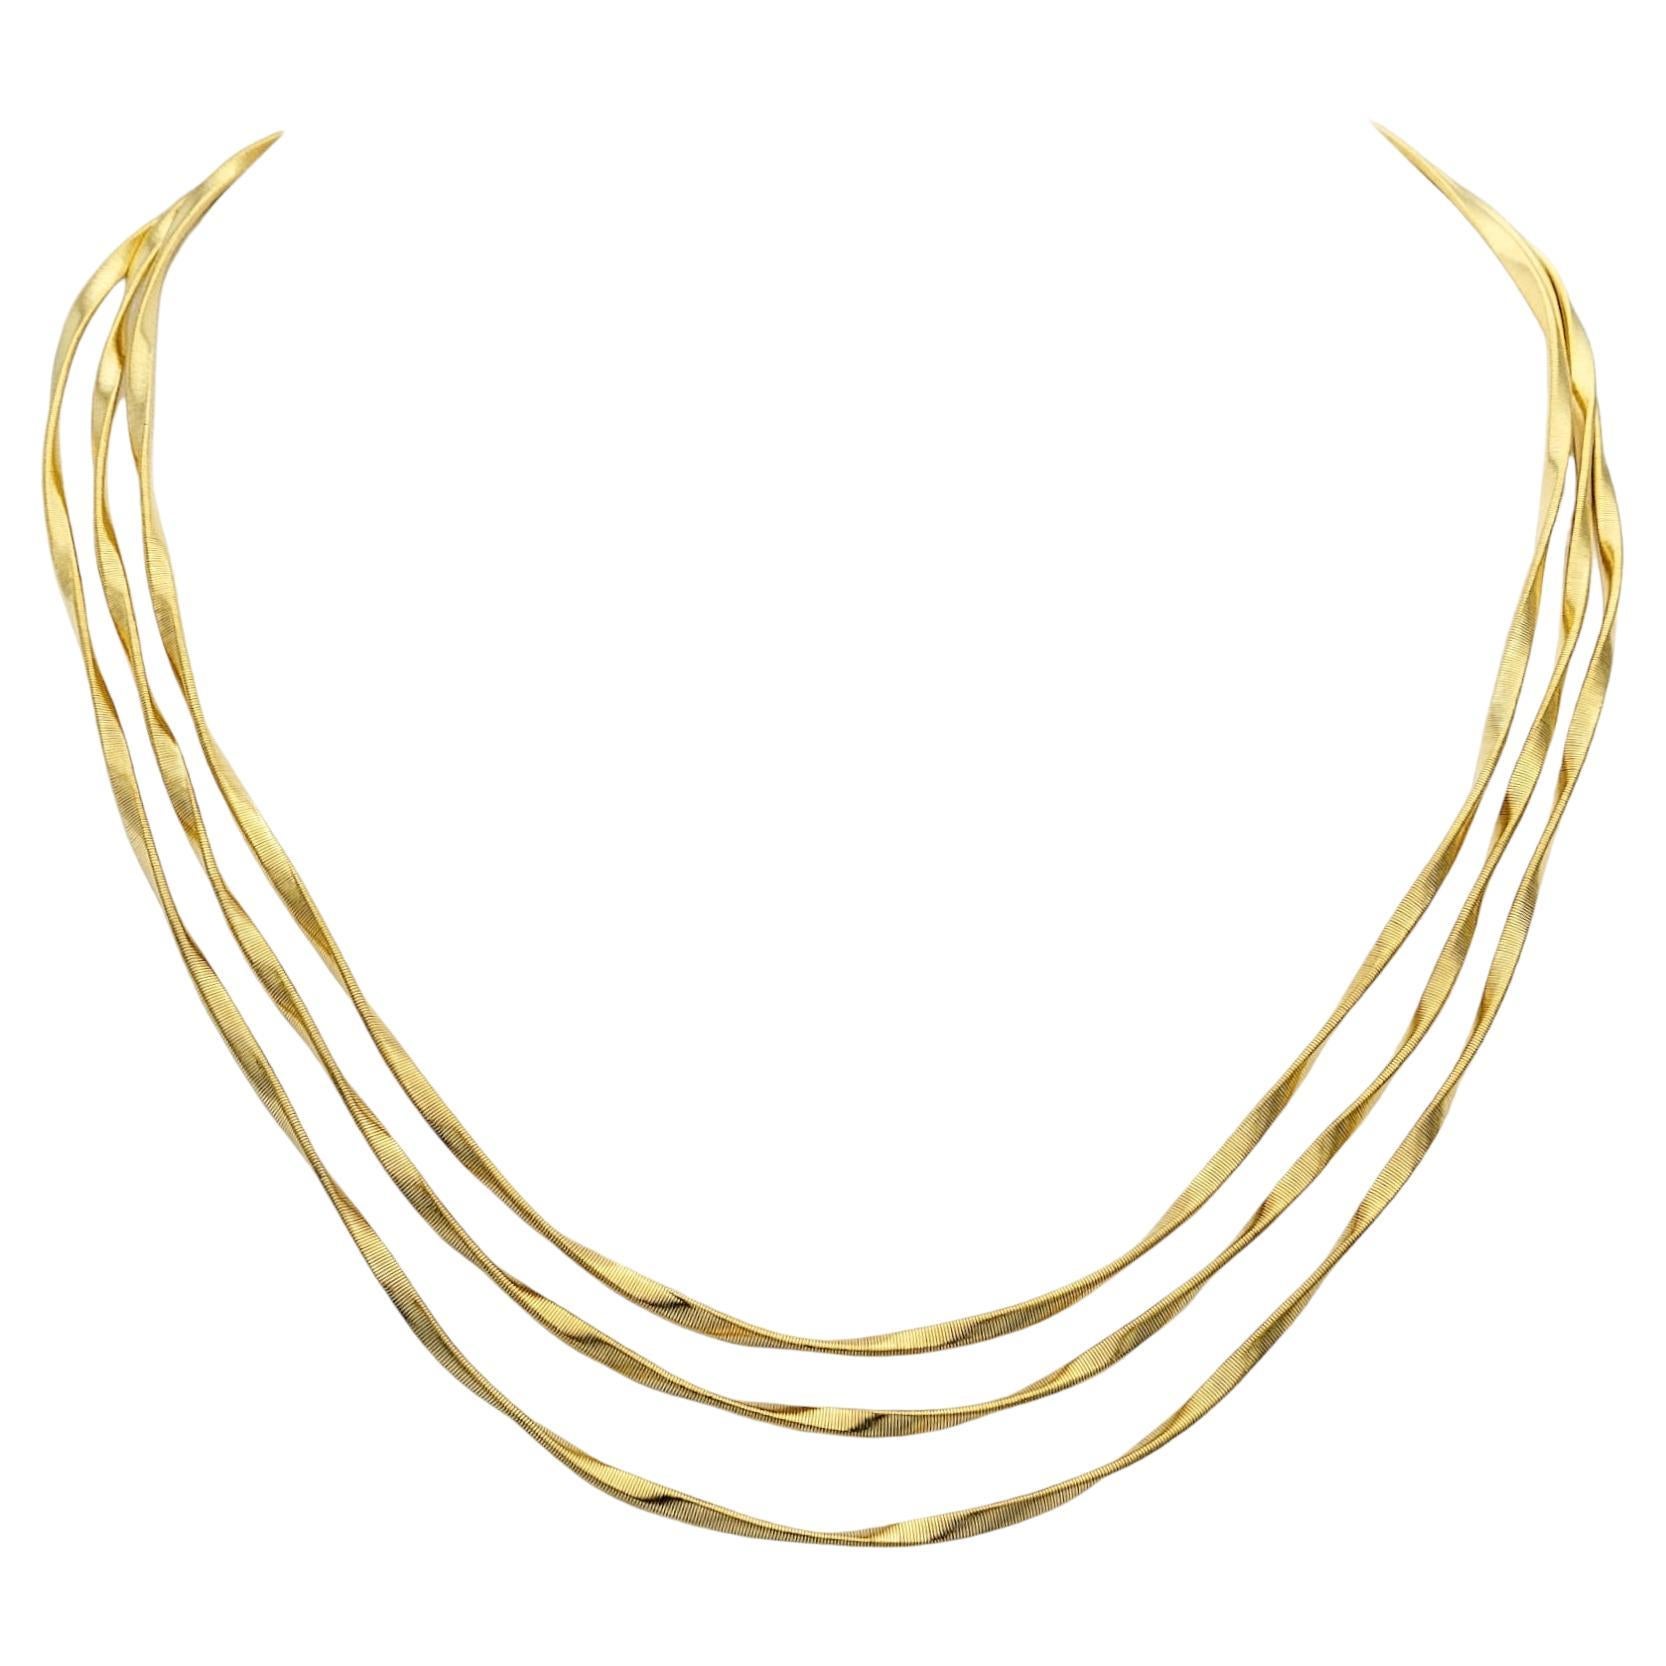 MarCo Bicego Marrakech Collection Three-Strand Necklace in 18 Karat Yellow Gold For Sale